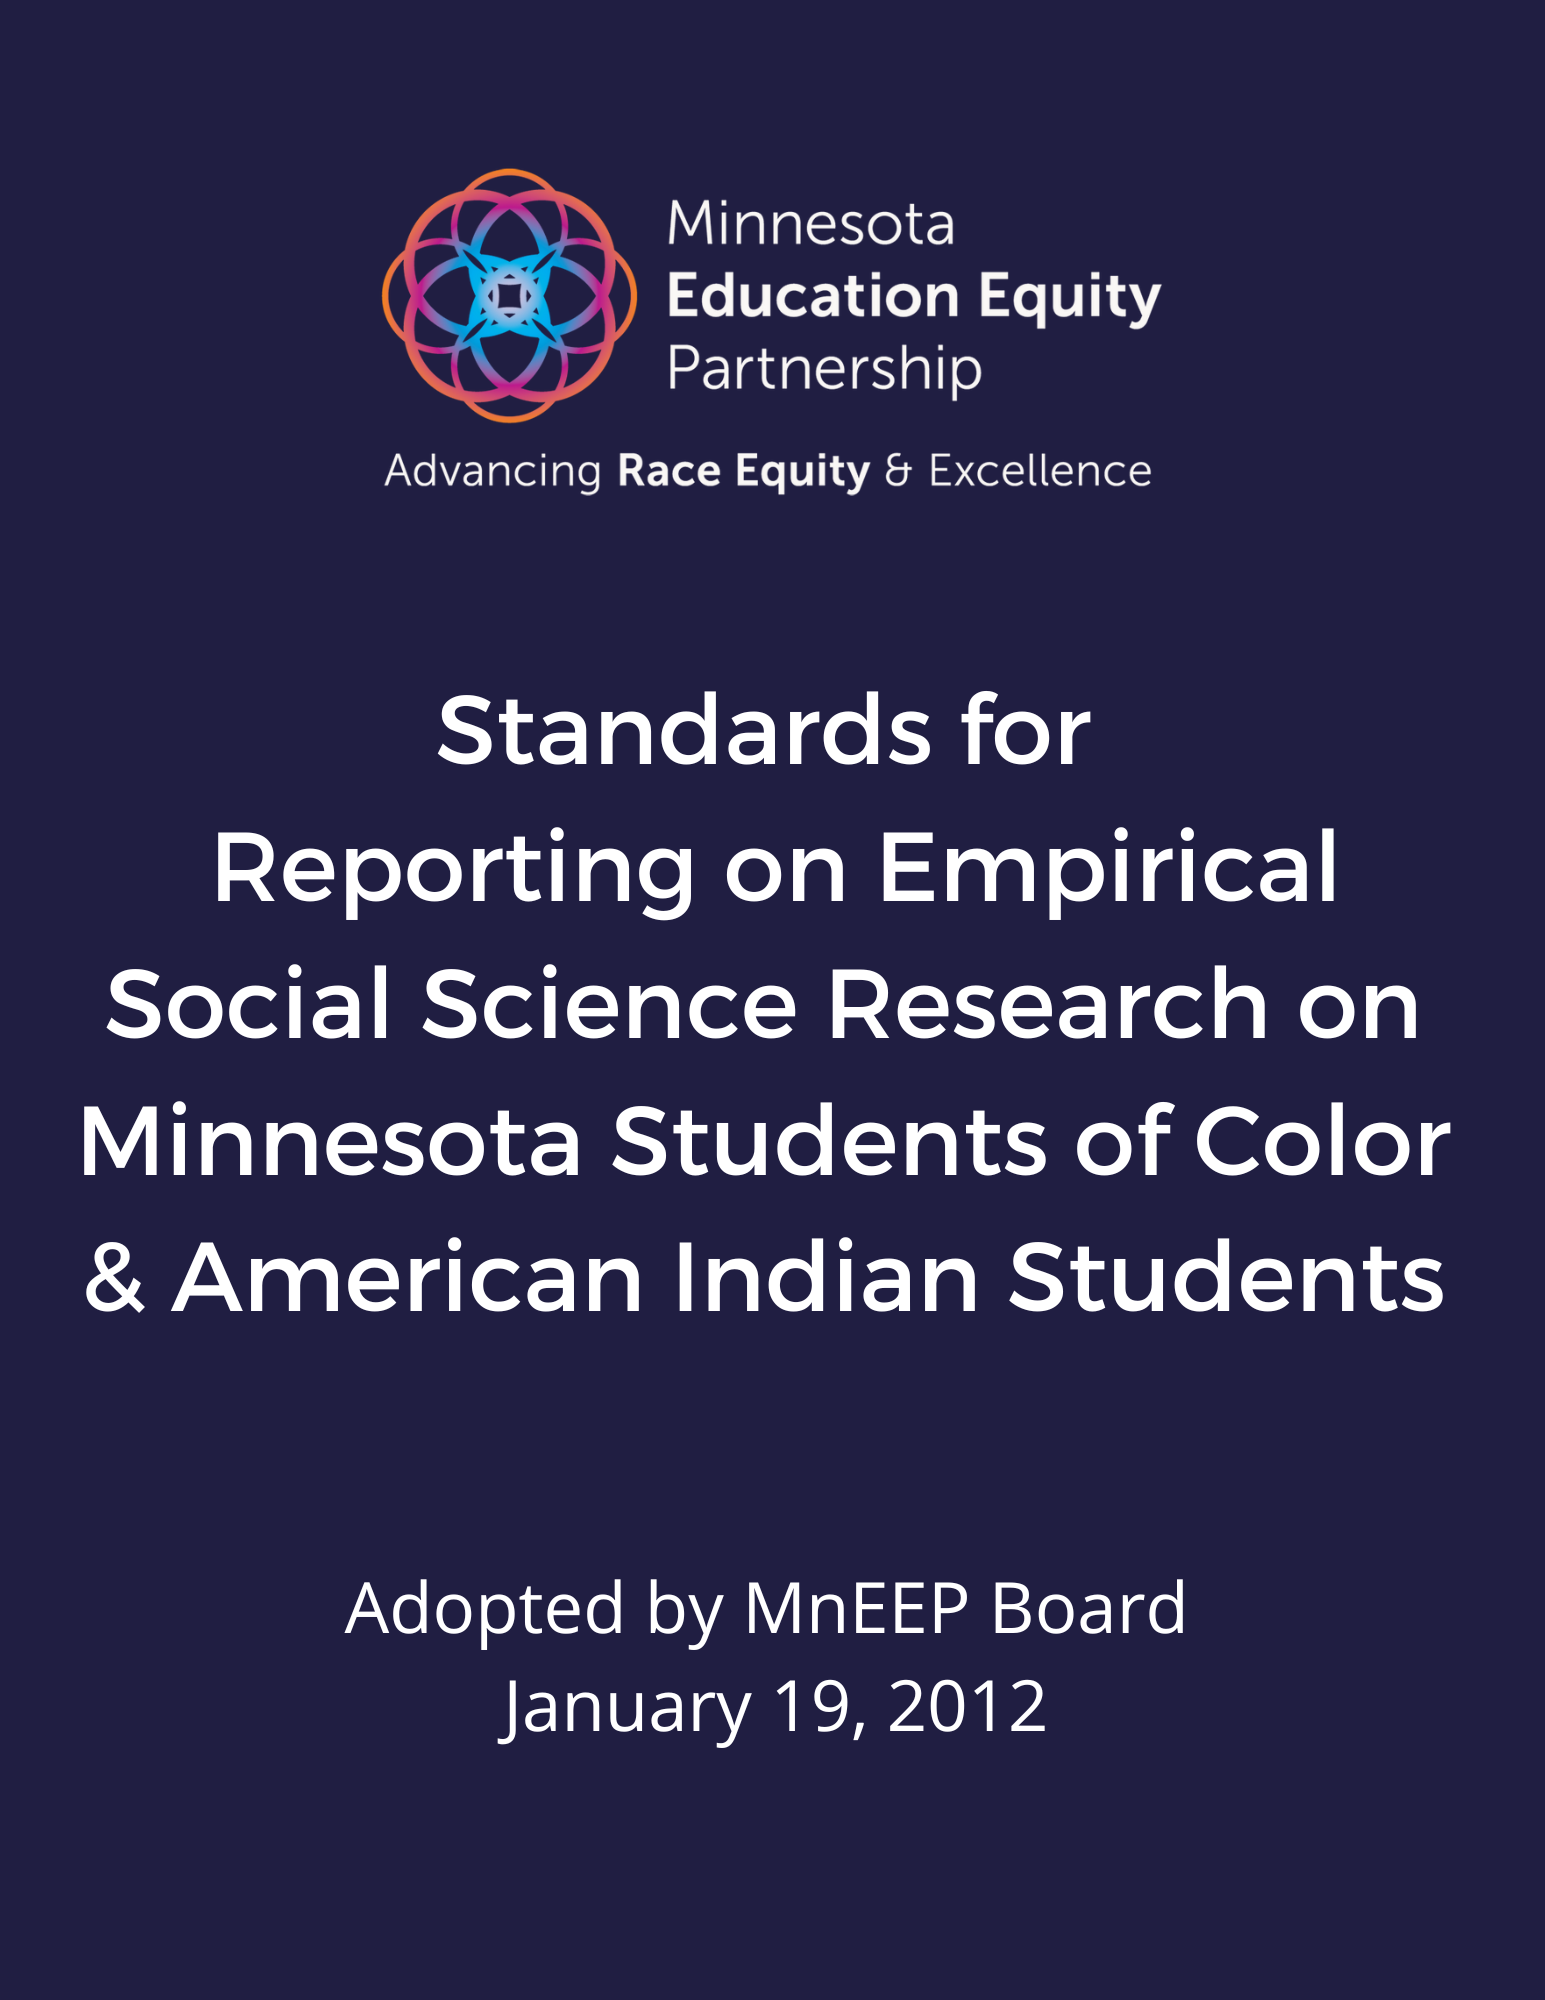 Research Standards for Reporting on Students of Color & Indigenous Students